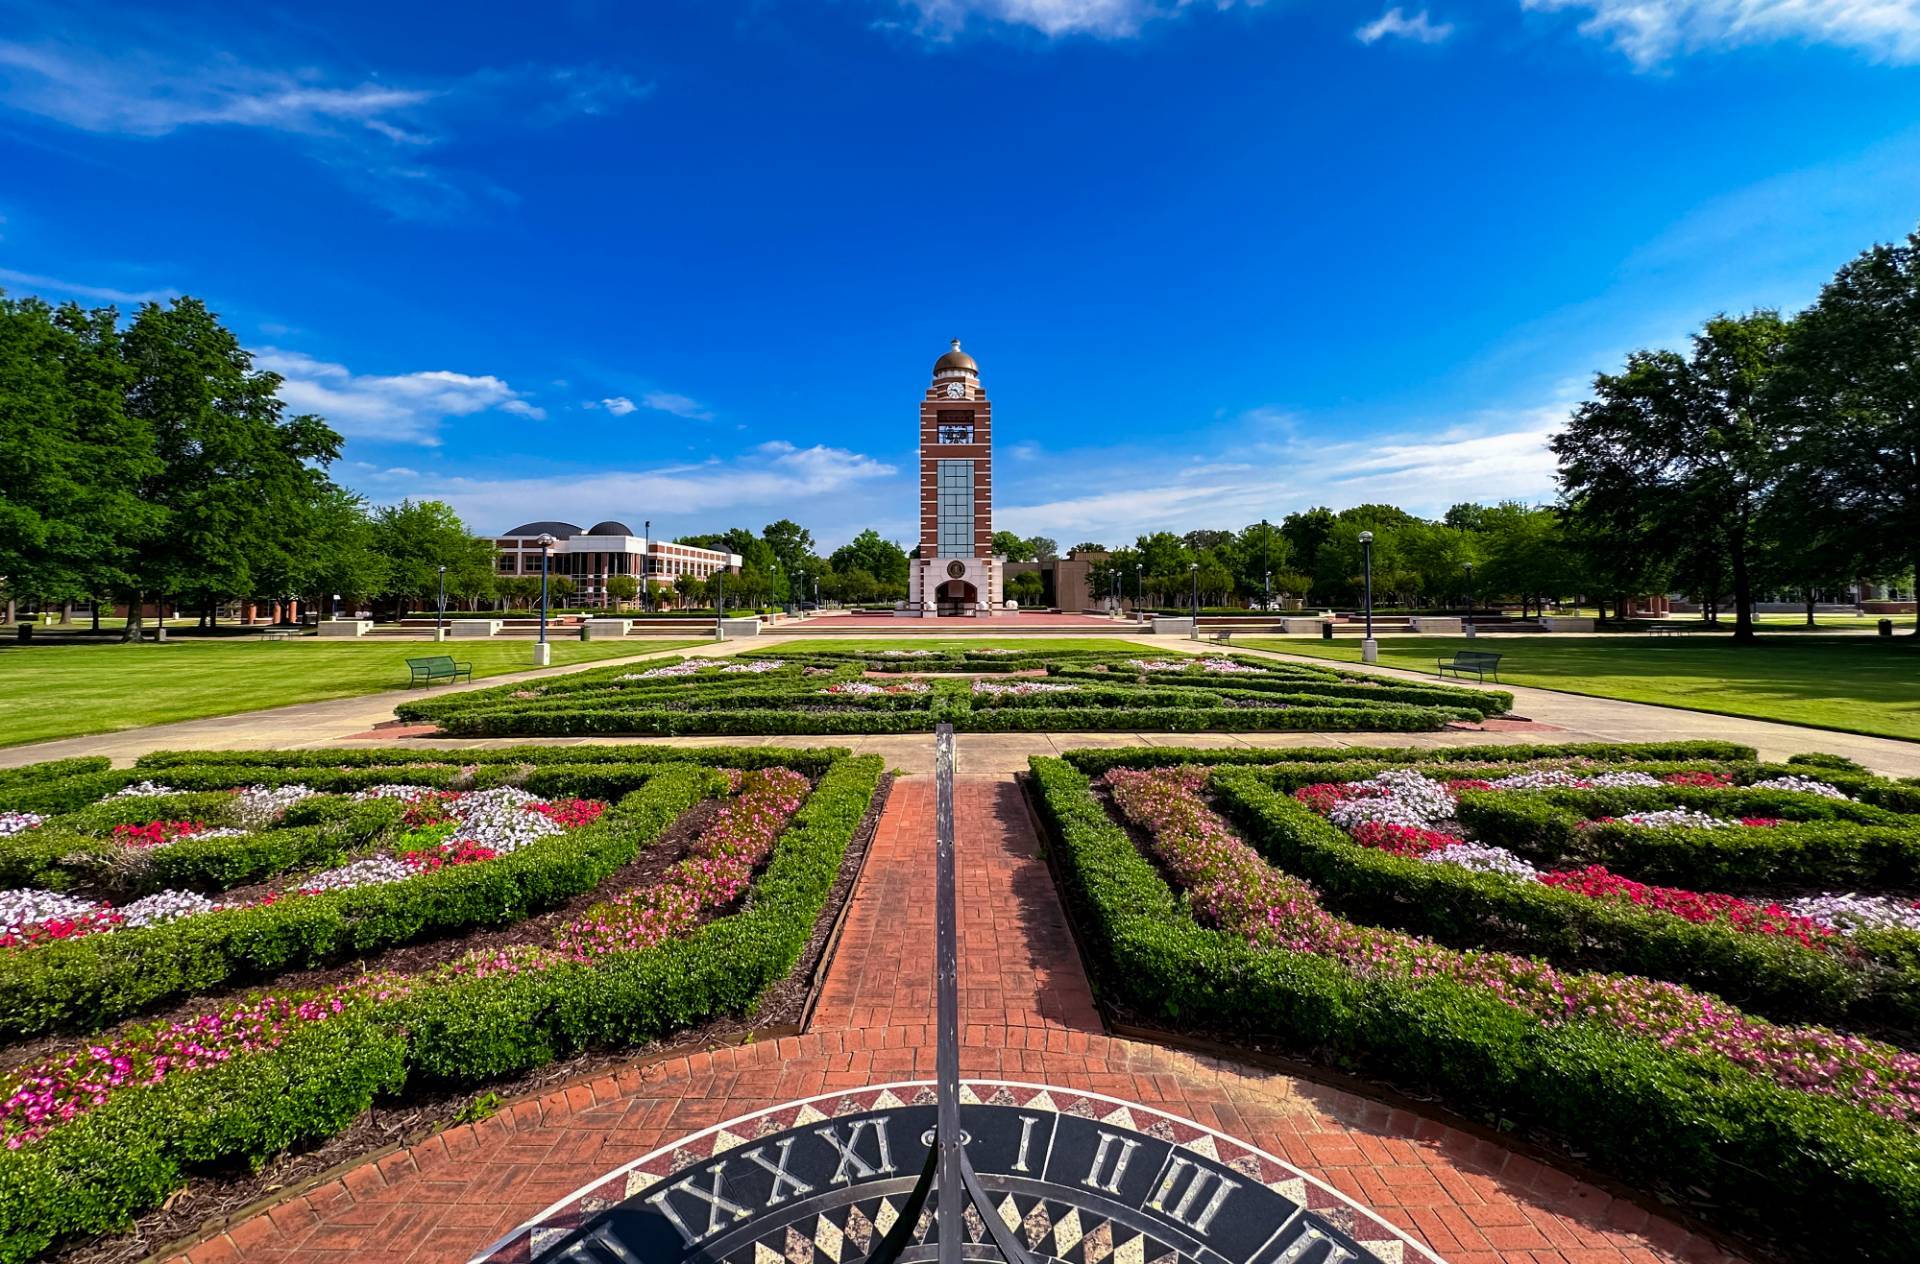 The UAFS Bell Tower